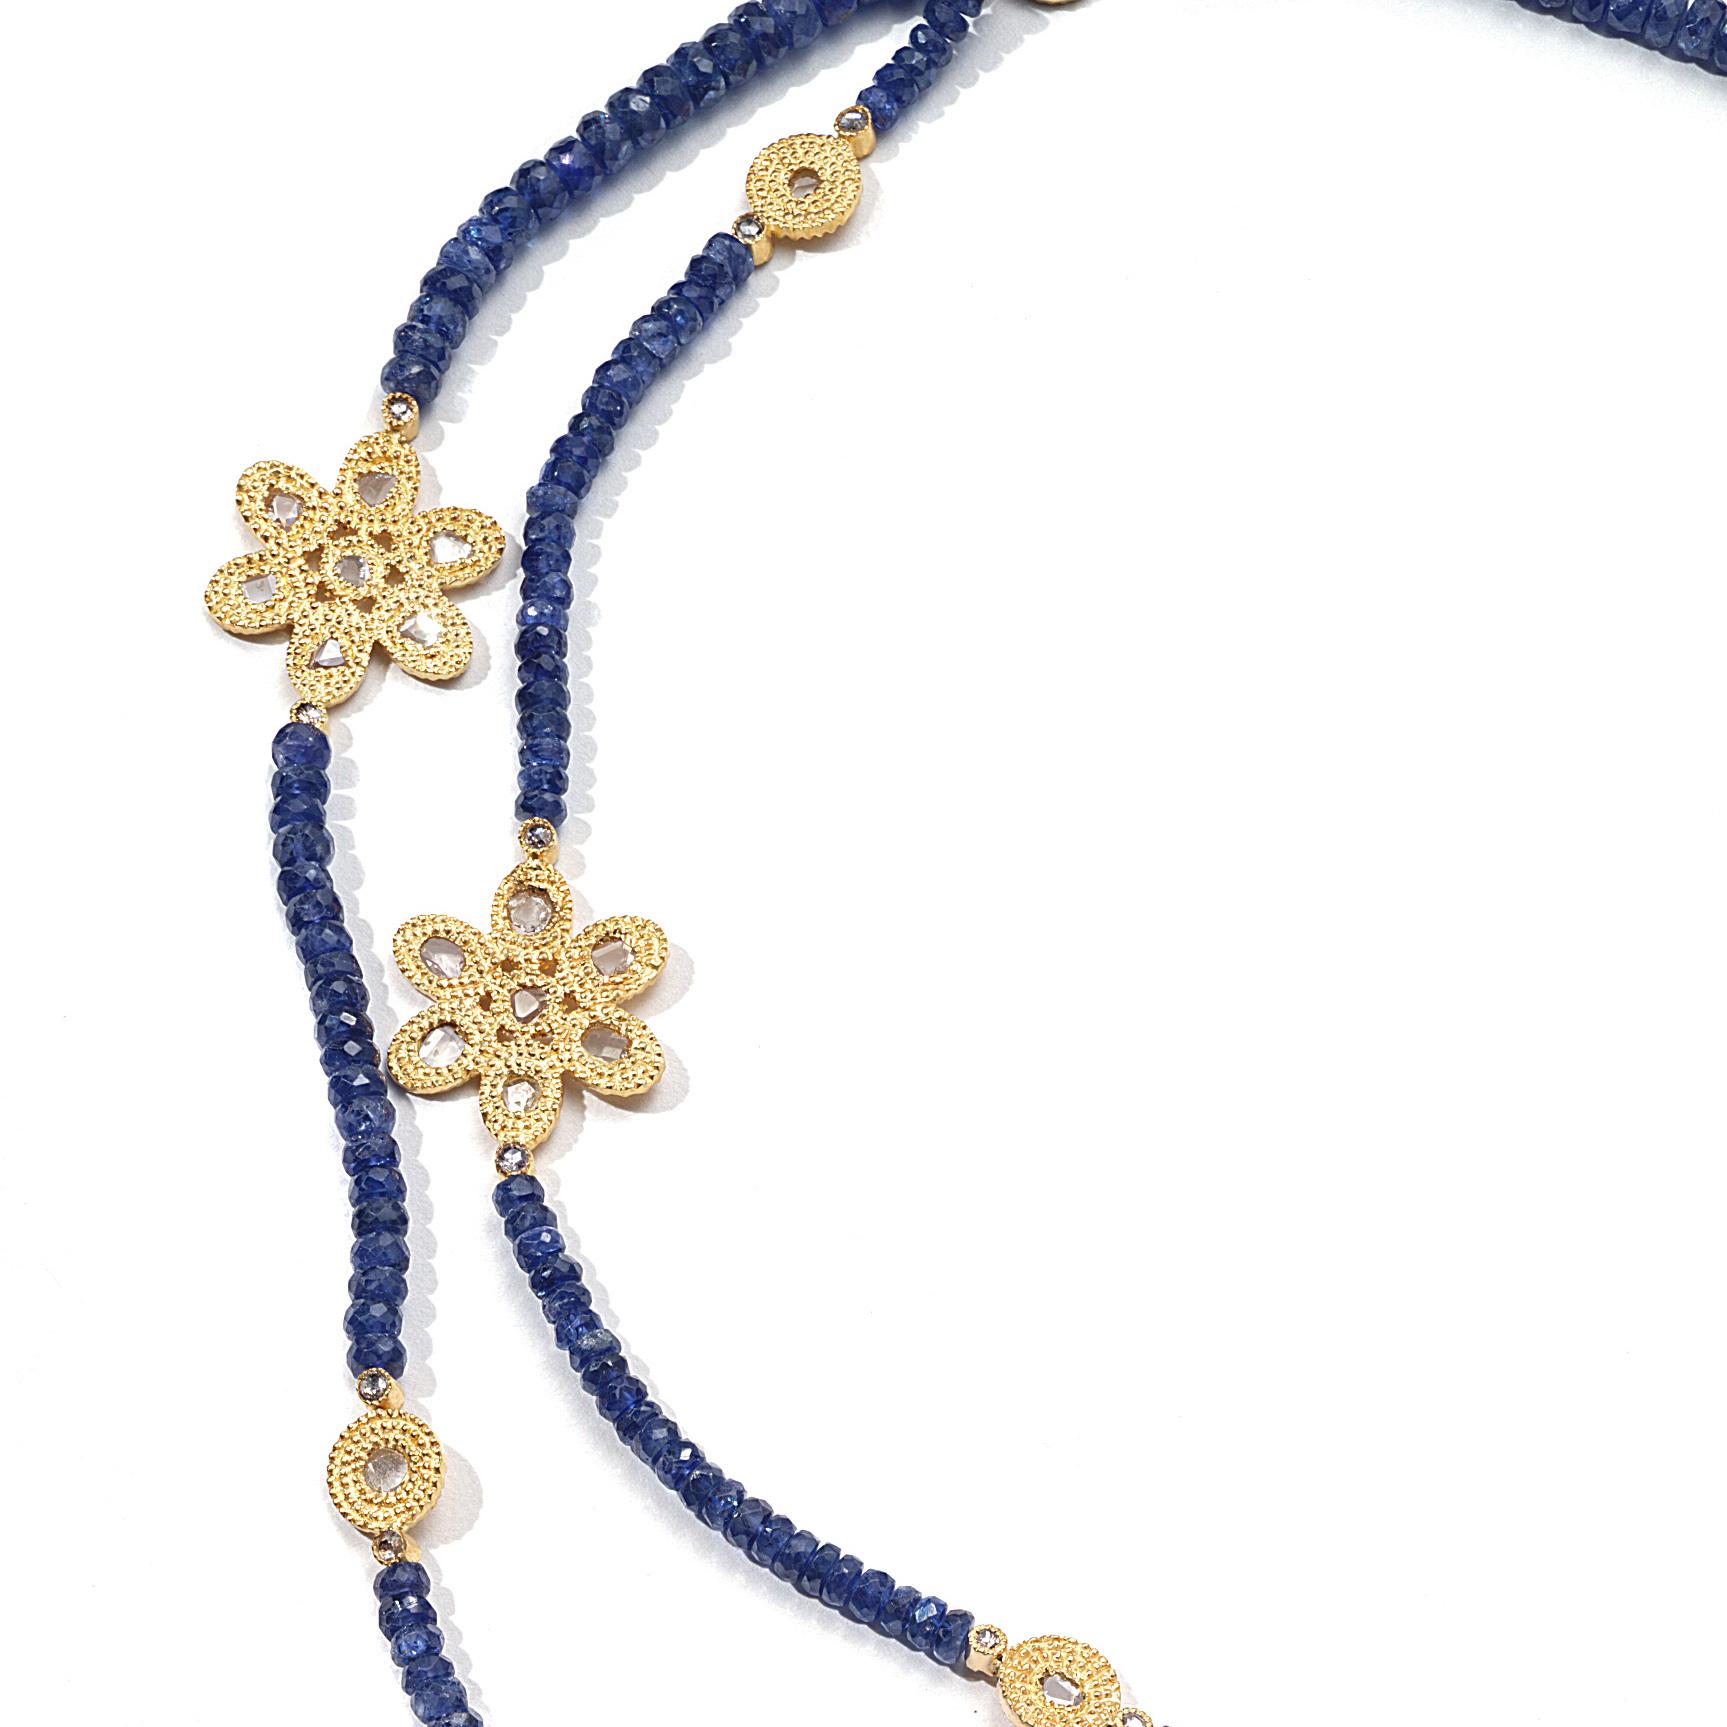 36IN Necklace with 98.02CTS Sapphire Beads,3.42CTS Diamonds, 20K Gold Flower Components, and Opera Components